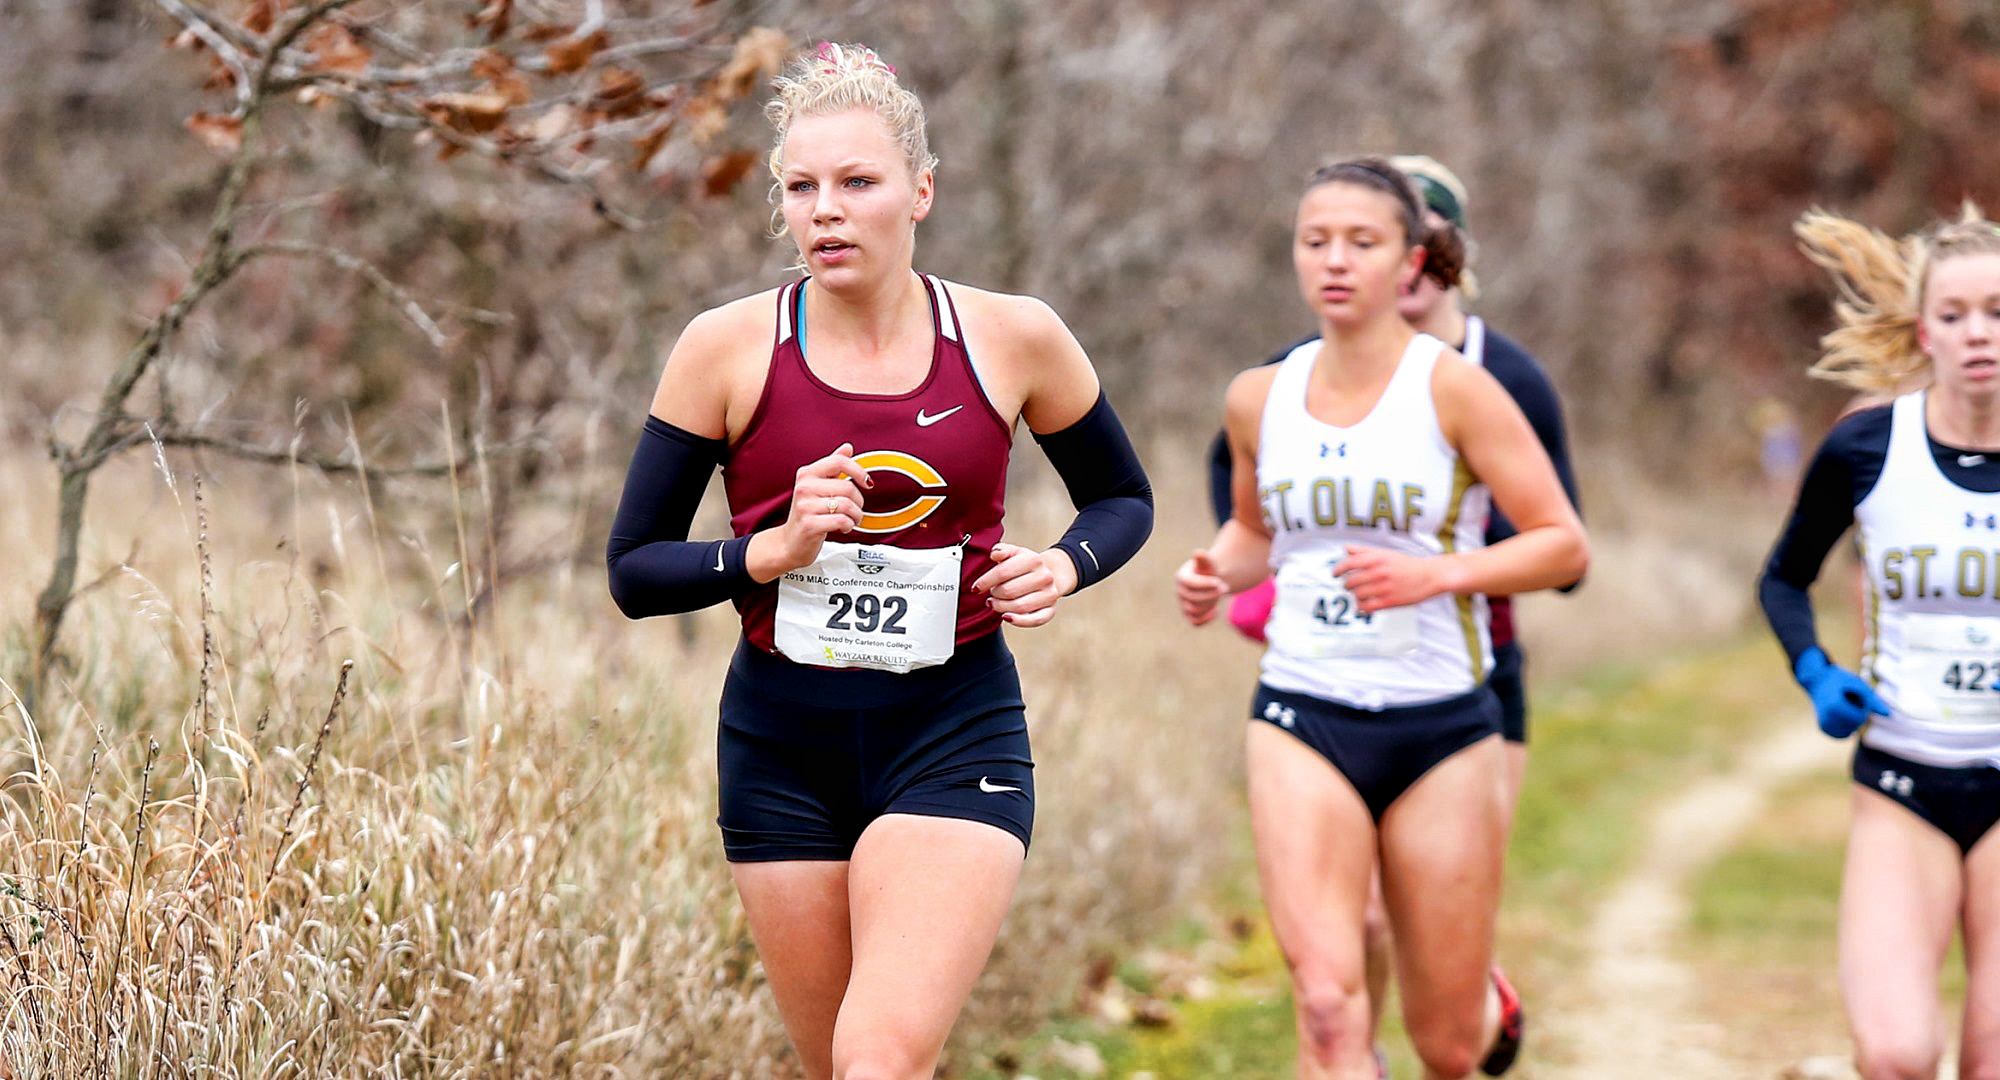 Senior Kara Andersen posted her second straight Top 30 finish at the NCAA Central Region Meet and earned All-Regions for the second consecutive year. (Photo by Nathan Lodermeier)